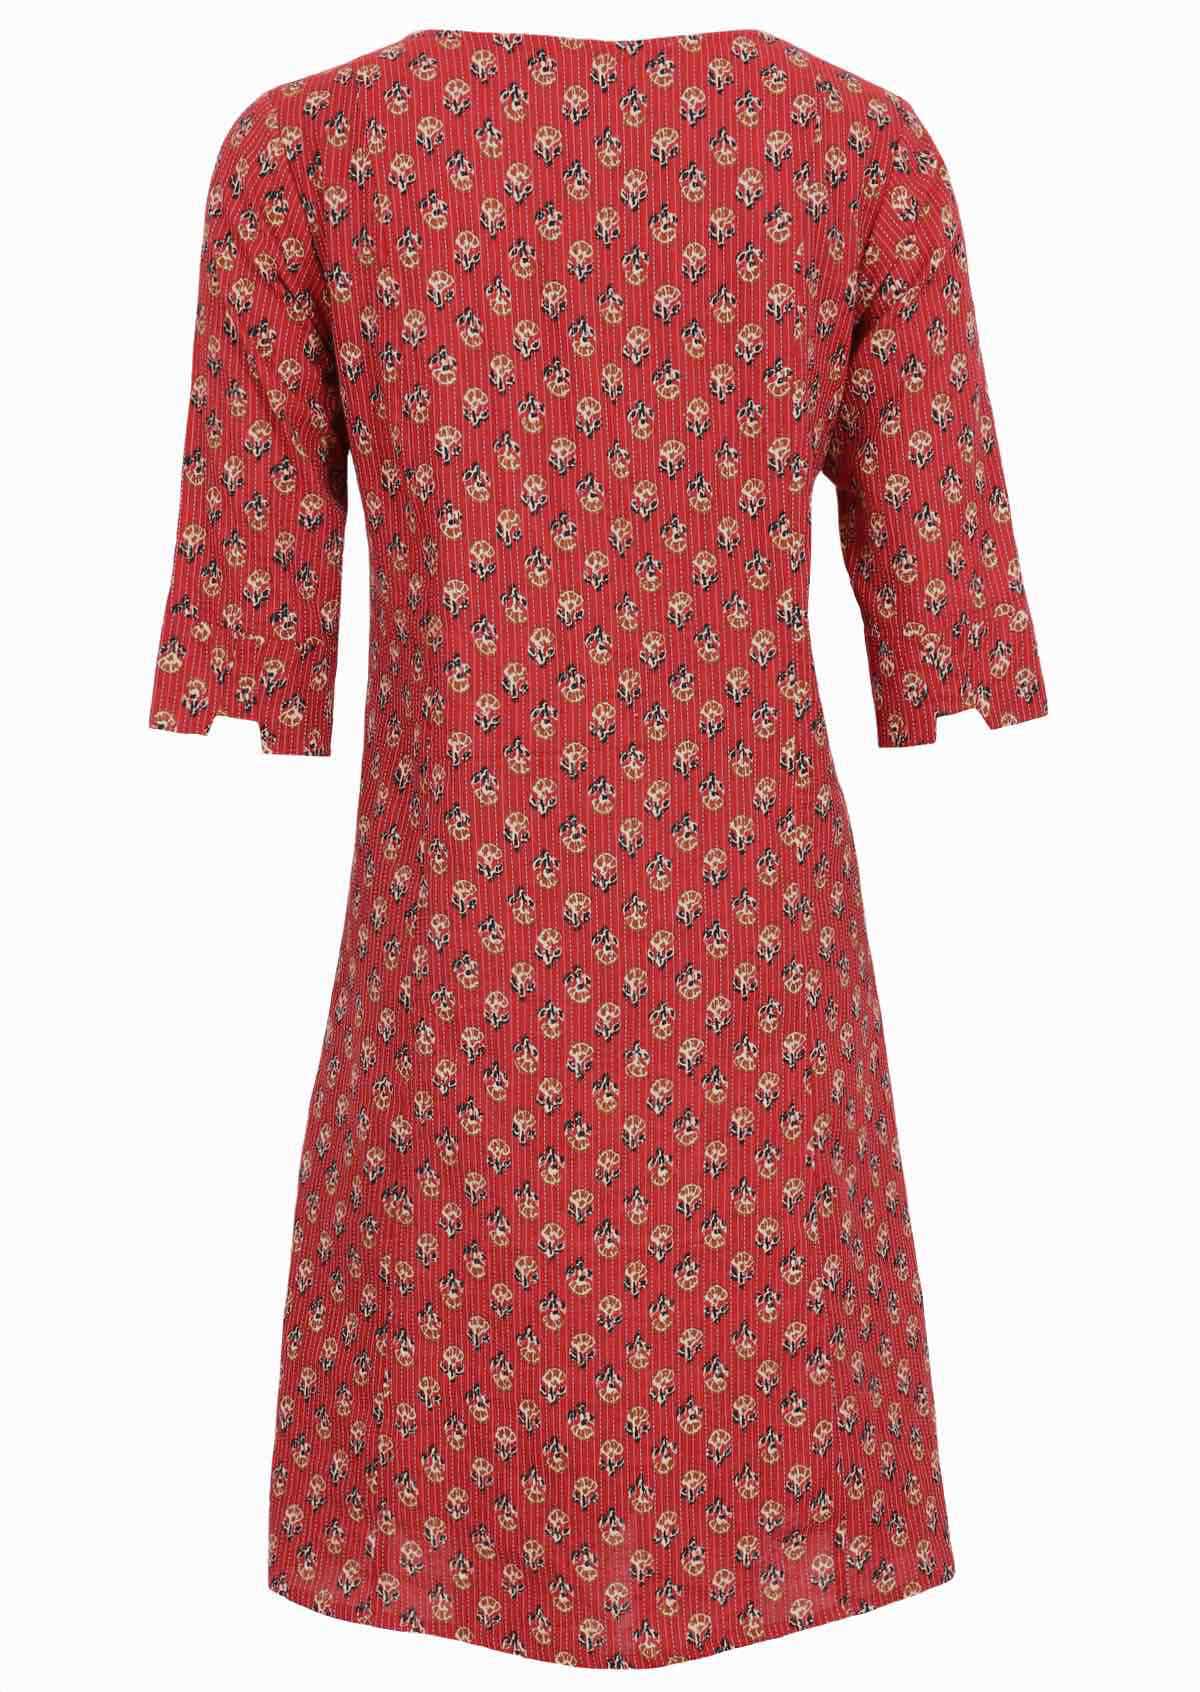 Loose fit cotton dress has a black floral print on burnt red base